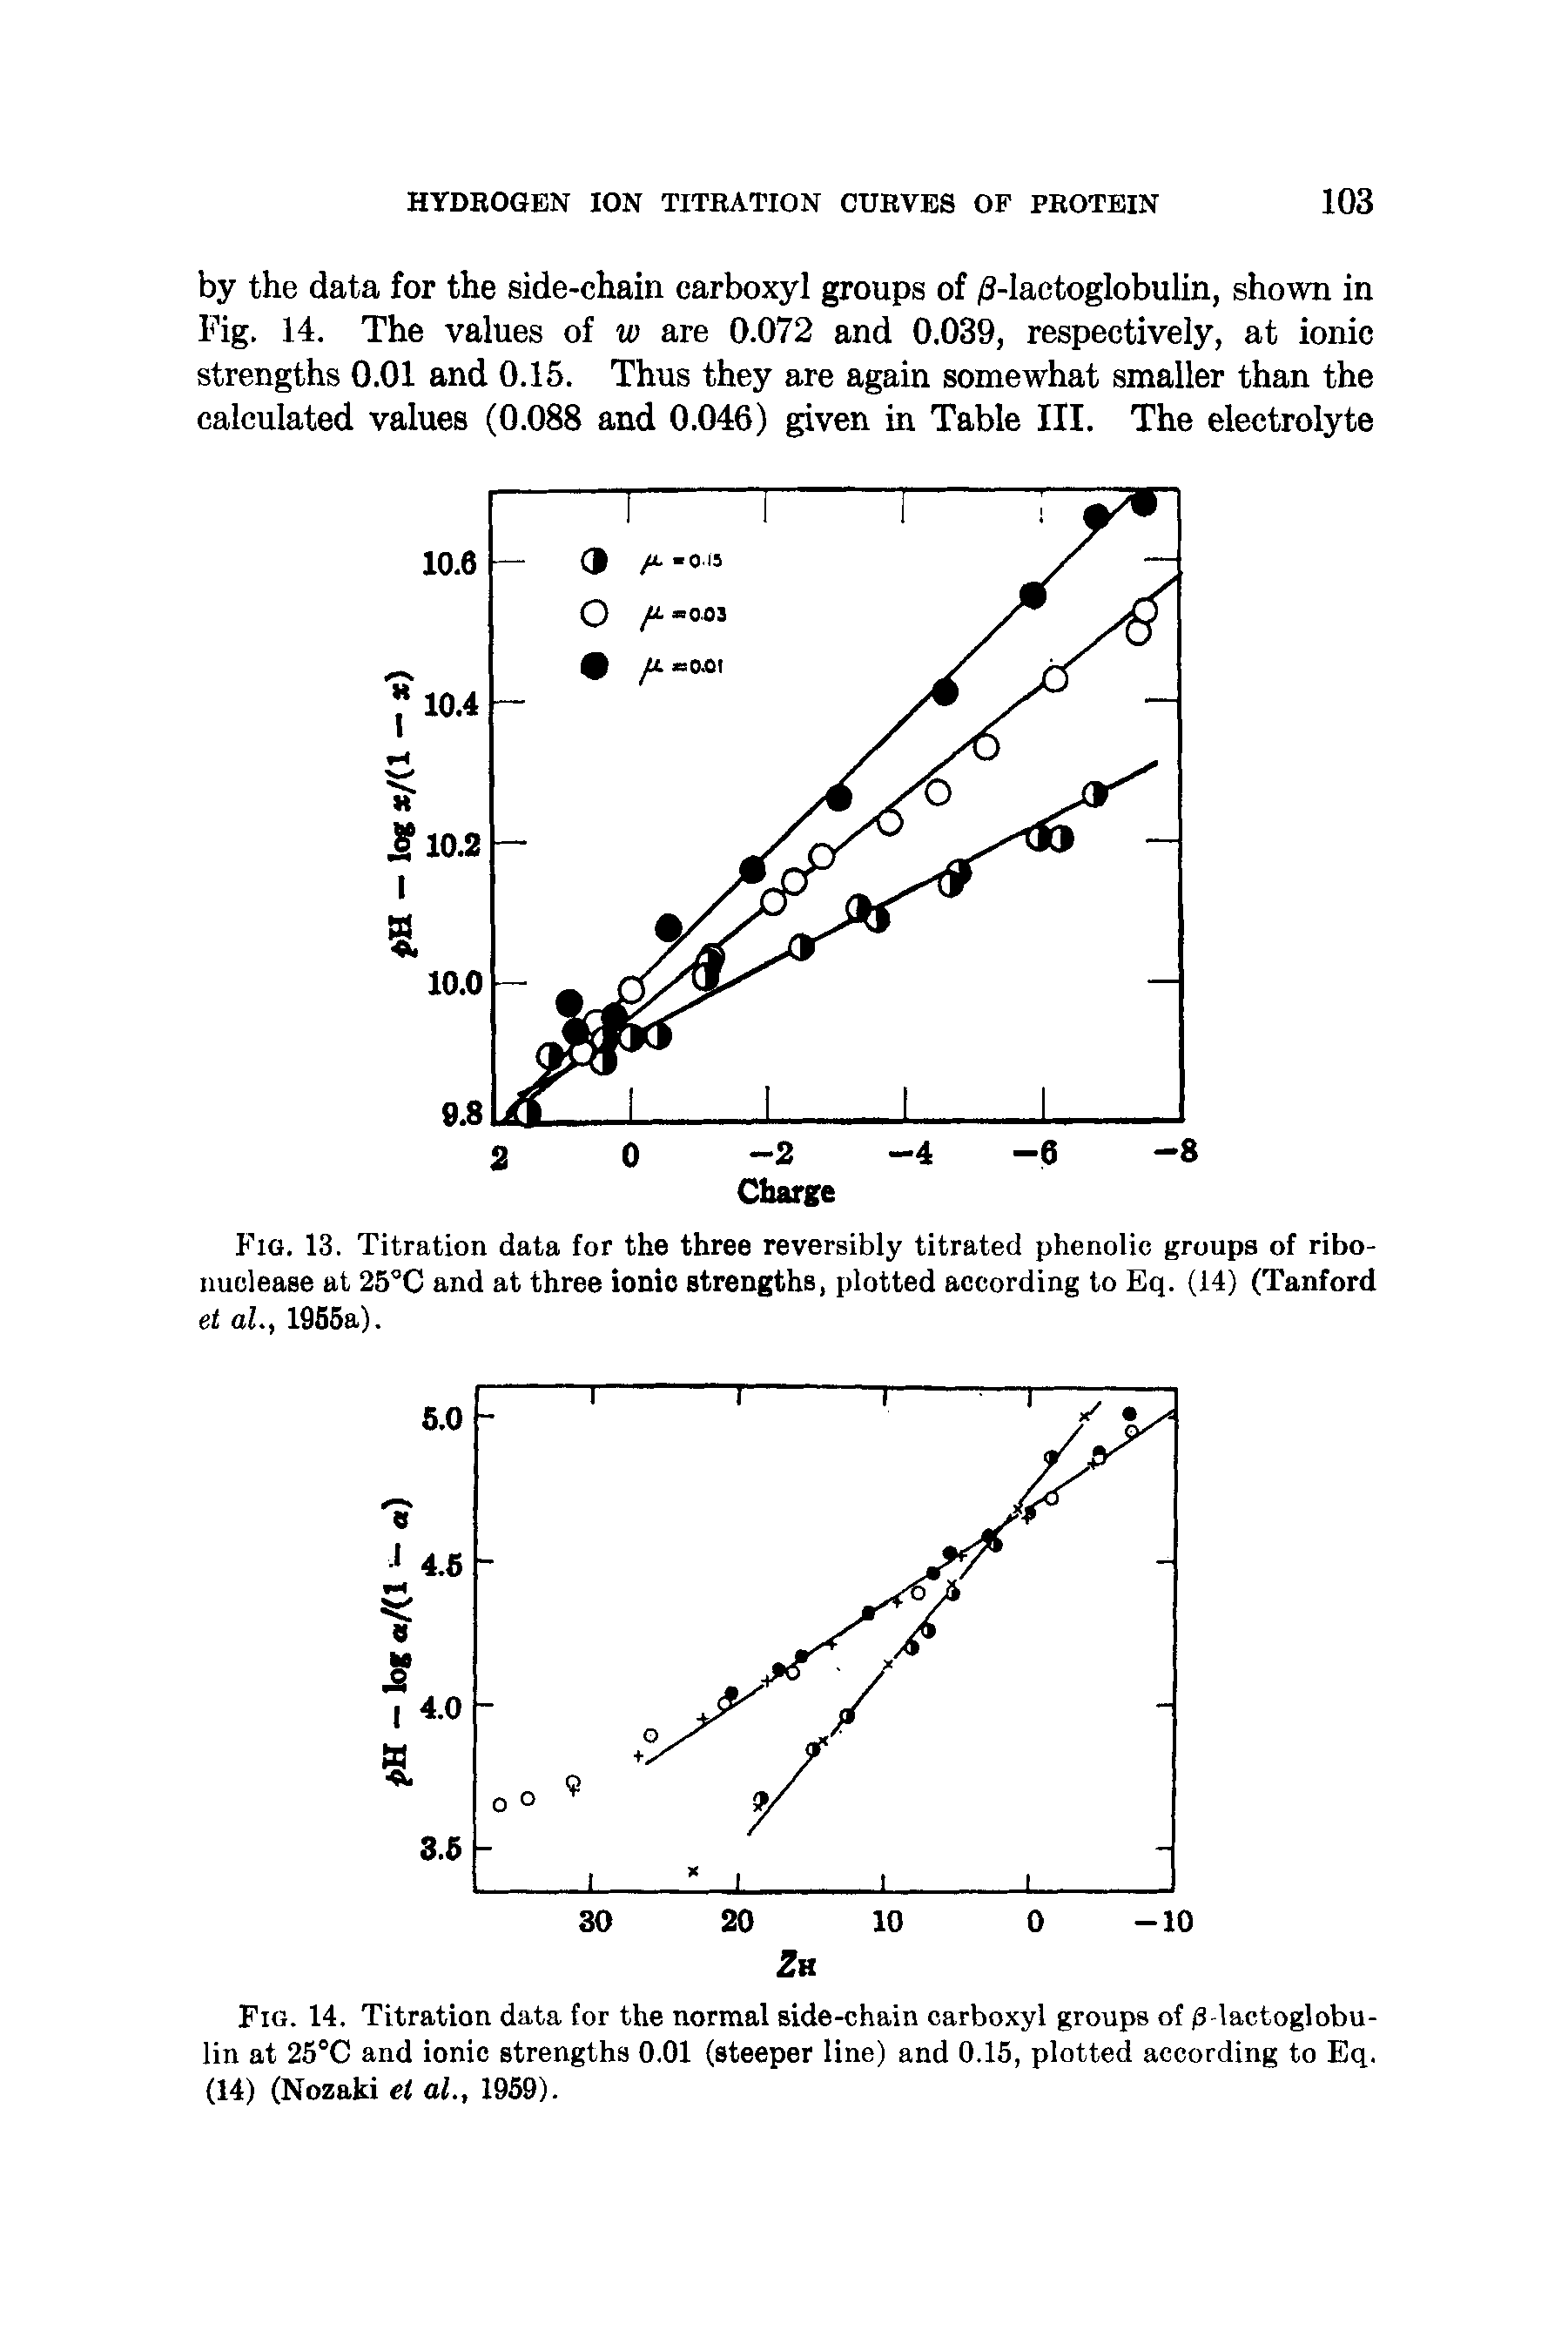 Fig. 13. Titration data for the three reversibly titrated phenolic groups of ribo-nuolease at 25°C and at three ionic strengths, plotted according to Eq. (14) (Tanford et al., 1955a).